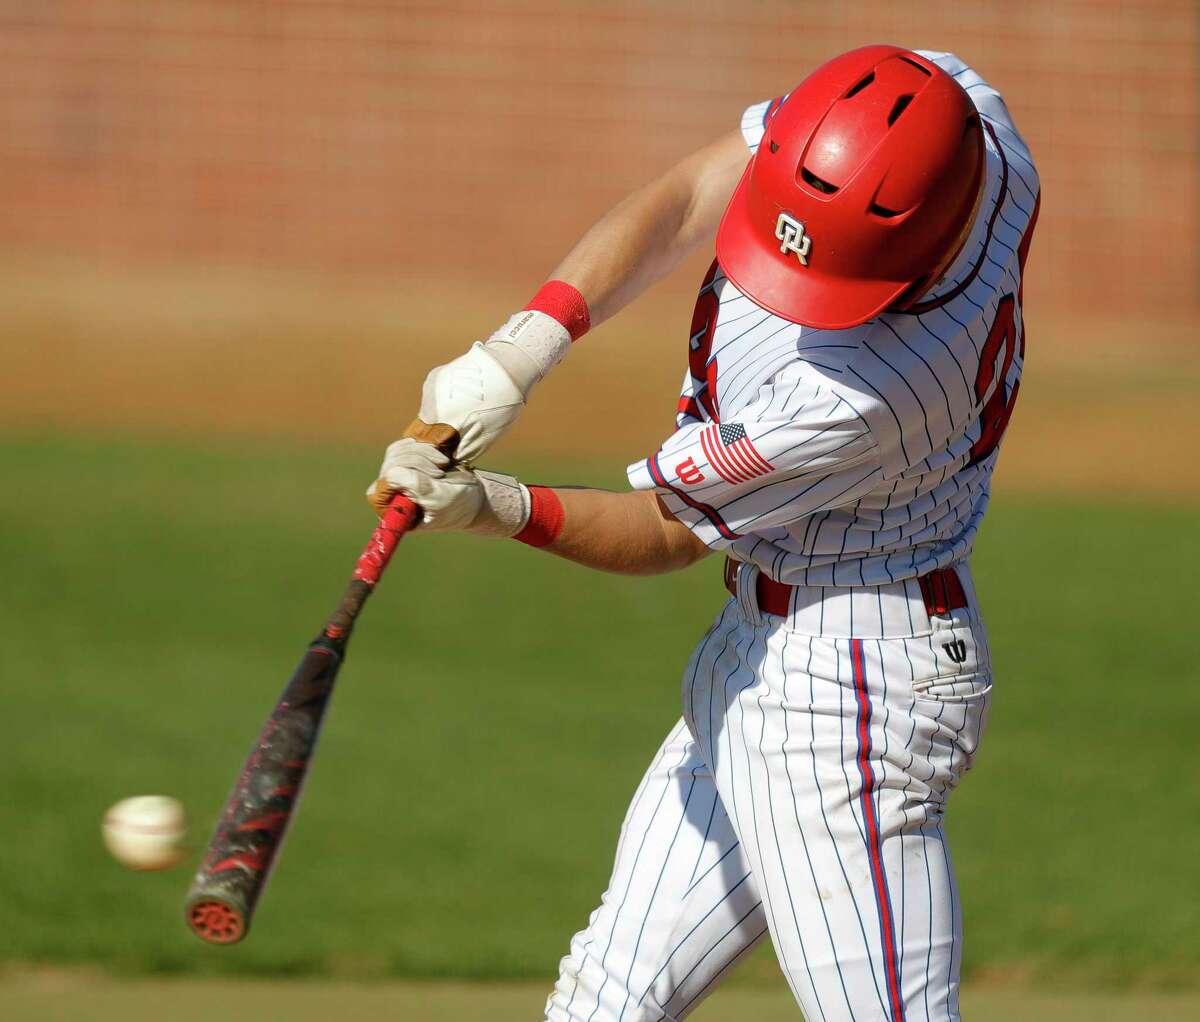 Seth Henry #26 of Oak Ridge connects on a pitch in the fourth inning of a high school baseball game at Oak Ridge High School, March 16, 2022. Henry reached first on an error by The Woodlands second baseman Parker McGill.